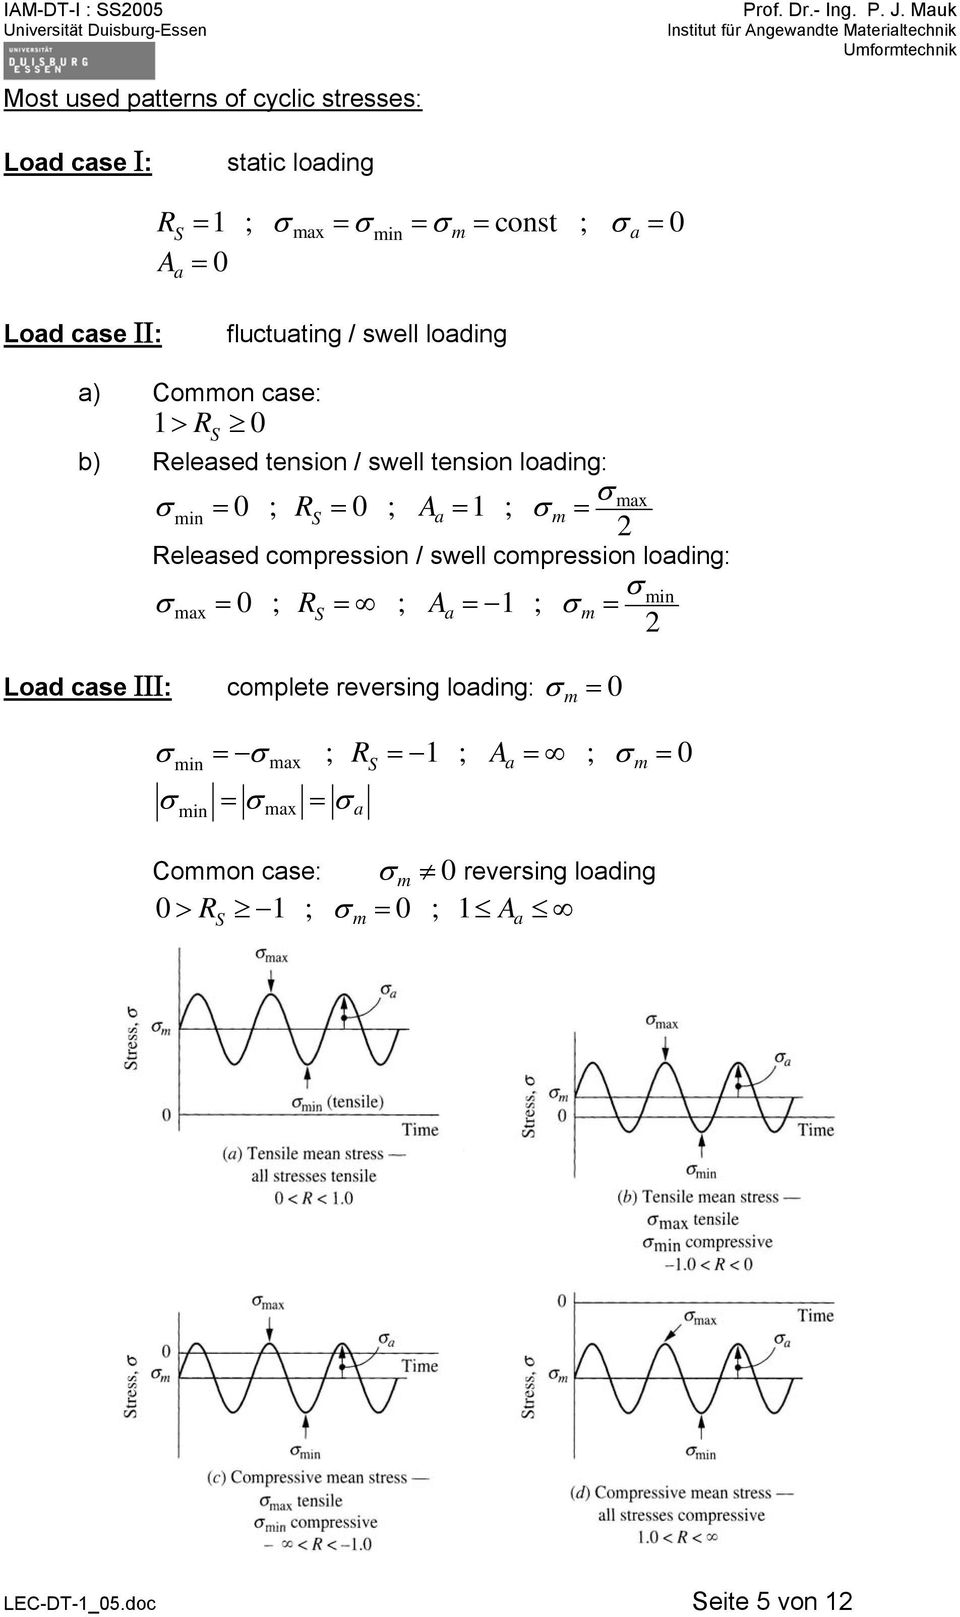 ax eleased copression / swell copression loading: ax = 0 ; S = ; Aa = 1 ; = 2 Load case ΙΙΙ: coplete reversing loading: